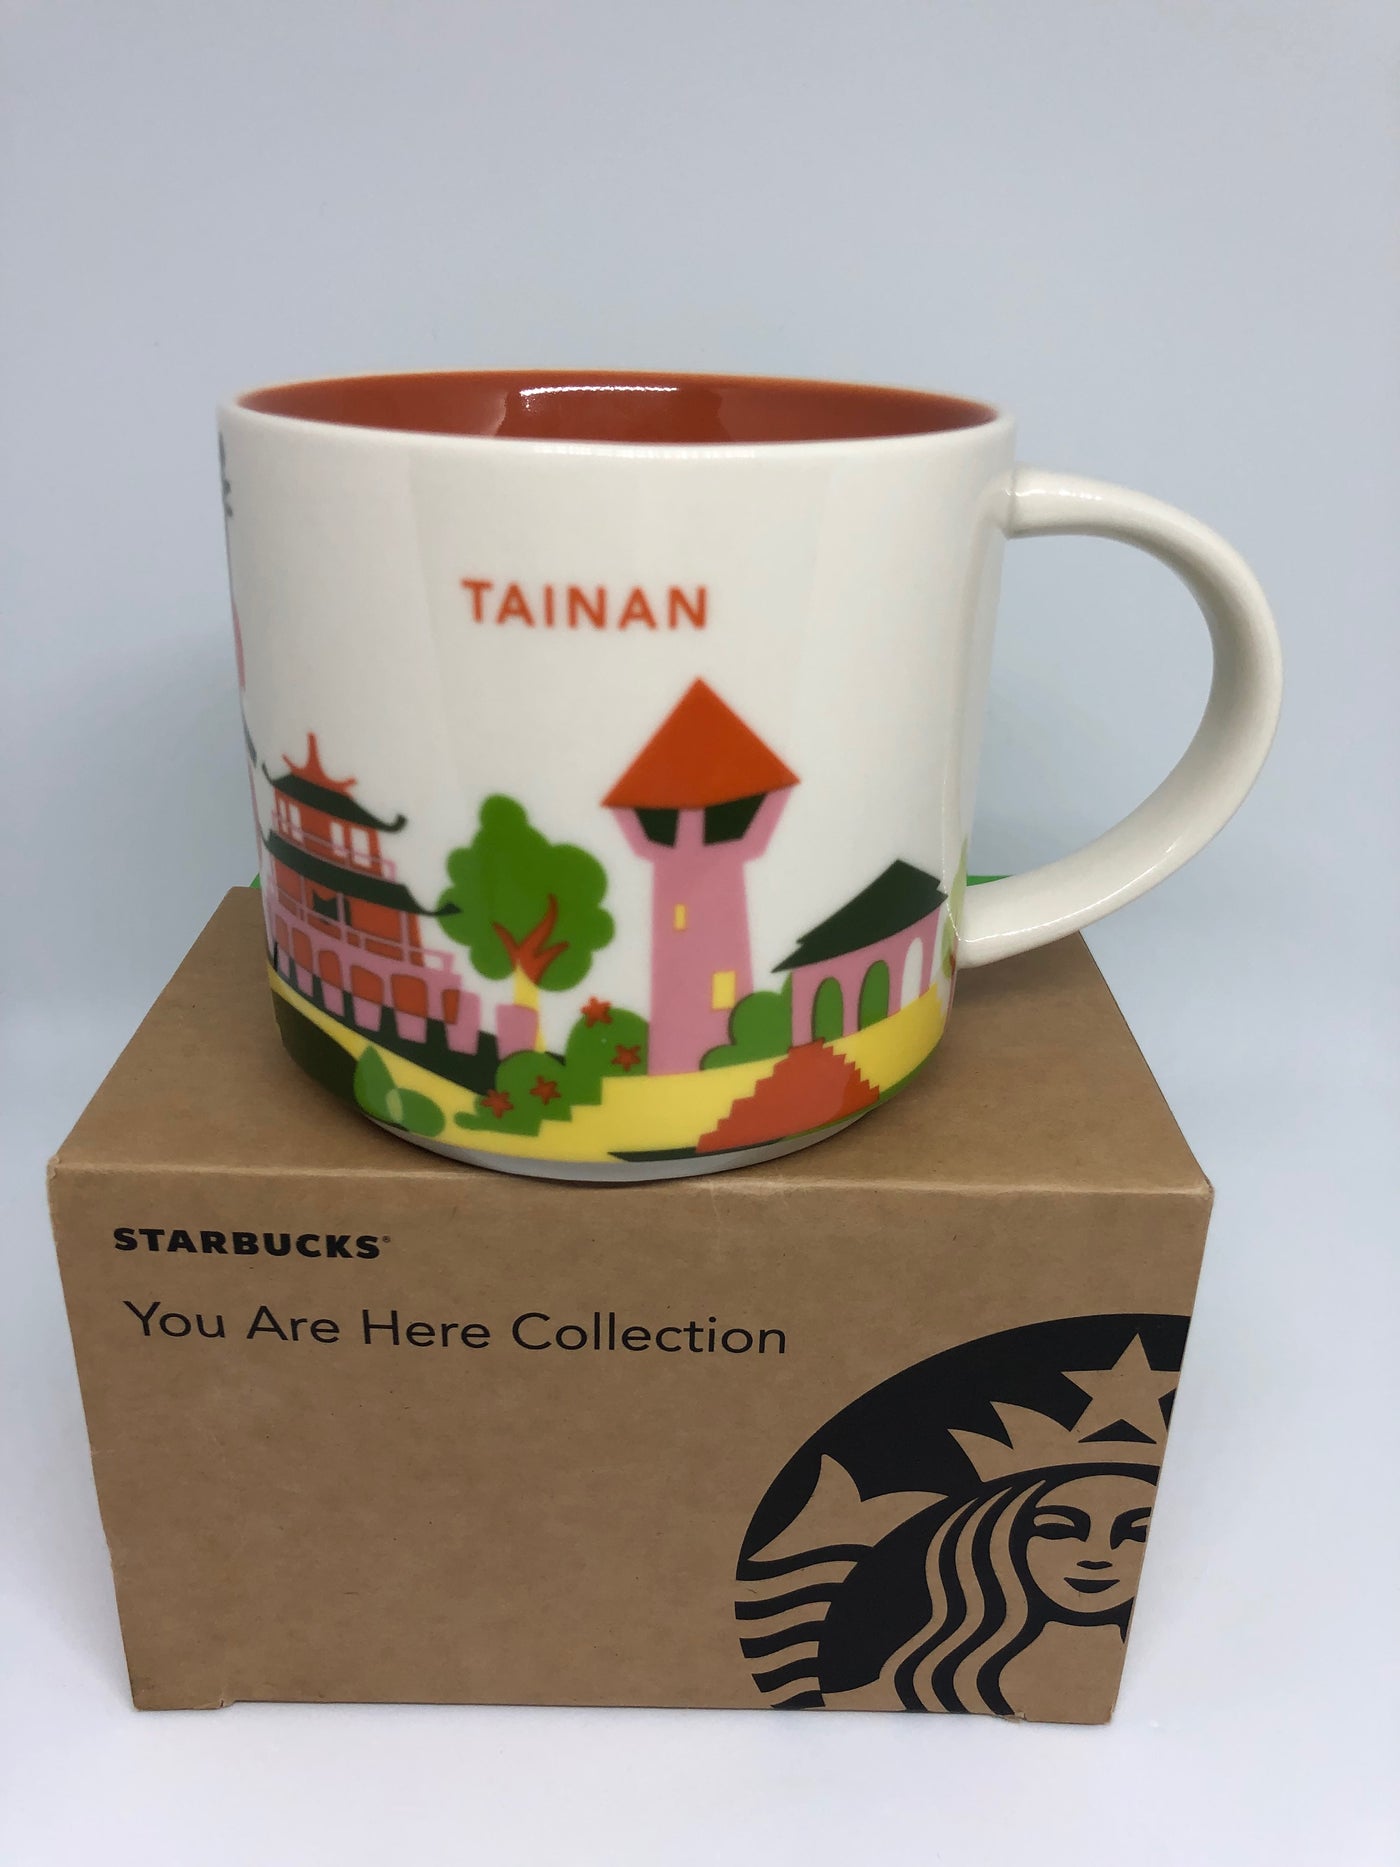 Starbucks You Are Here Collection Tainan Ceramic Coffee Mug New with Box